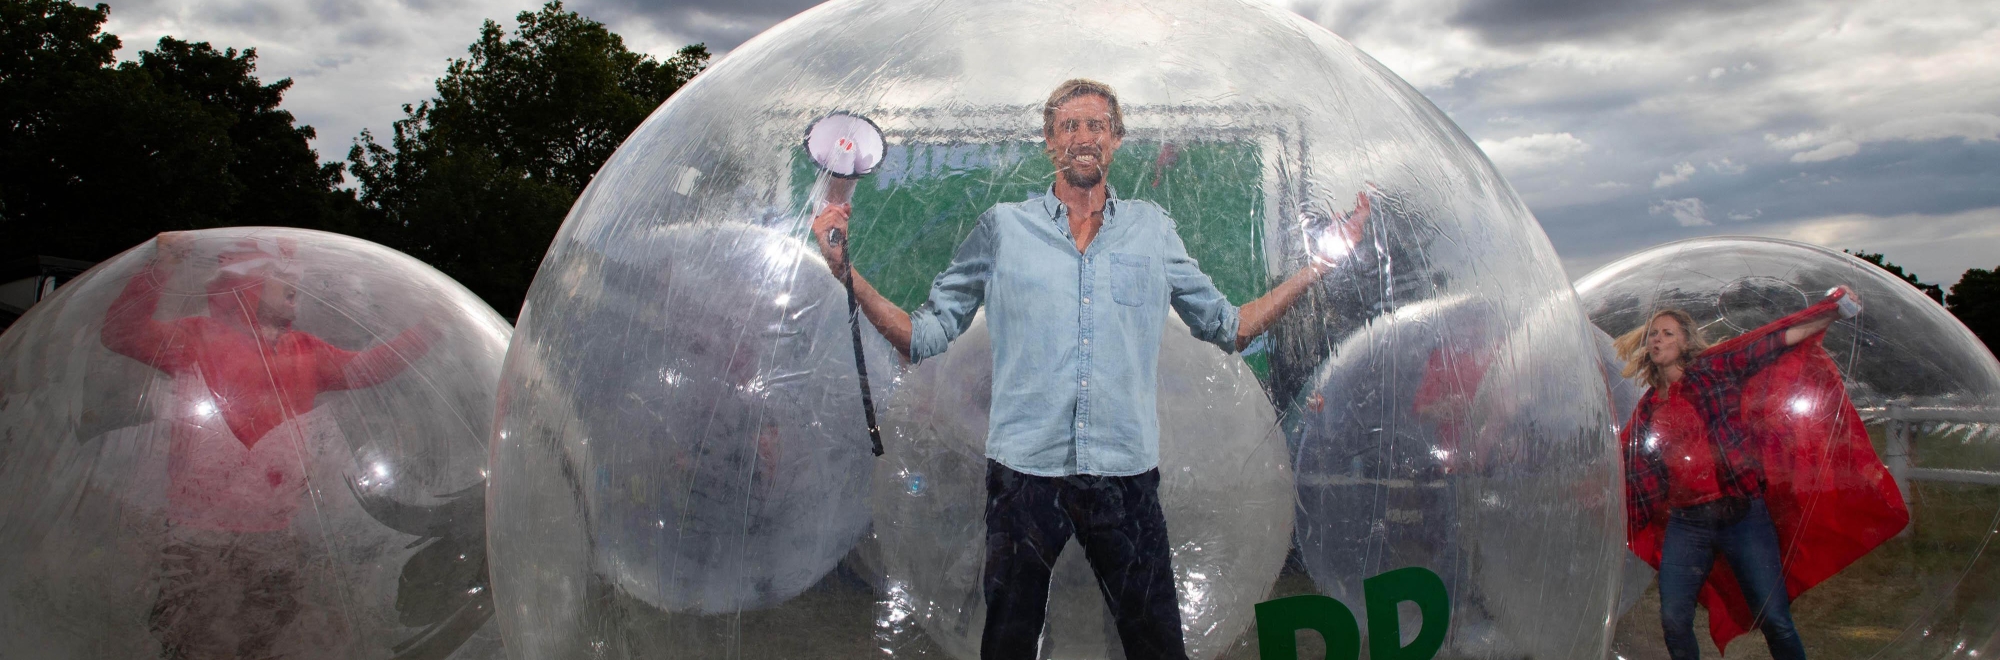 Paddy Power put Peter Crouch in a human hamster ball